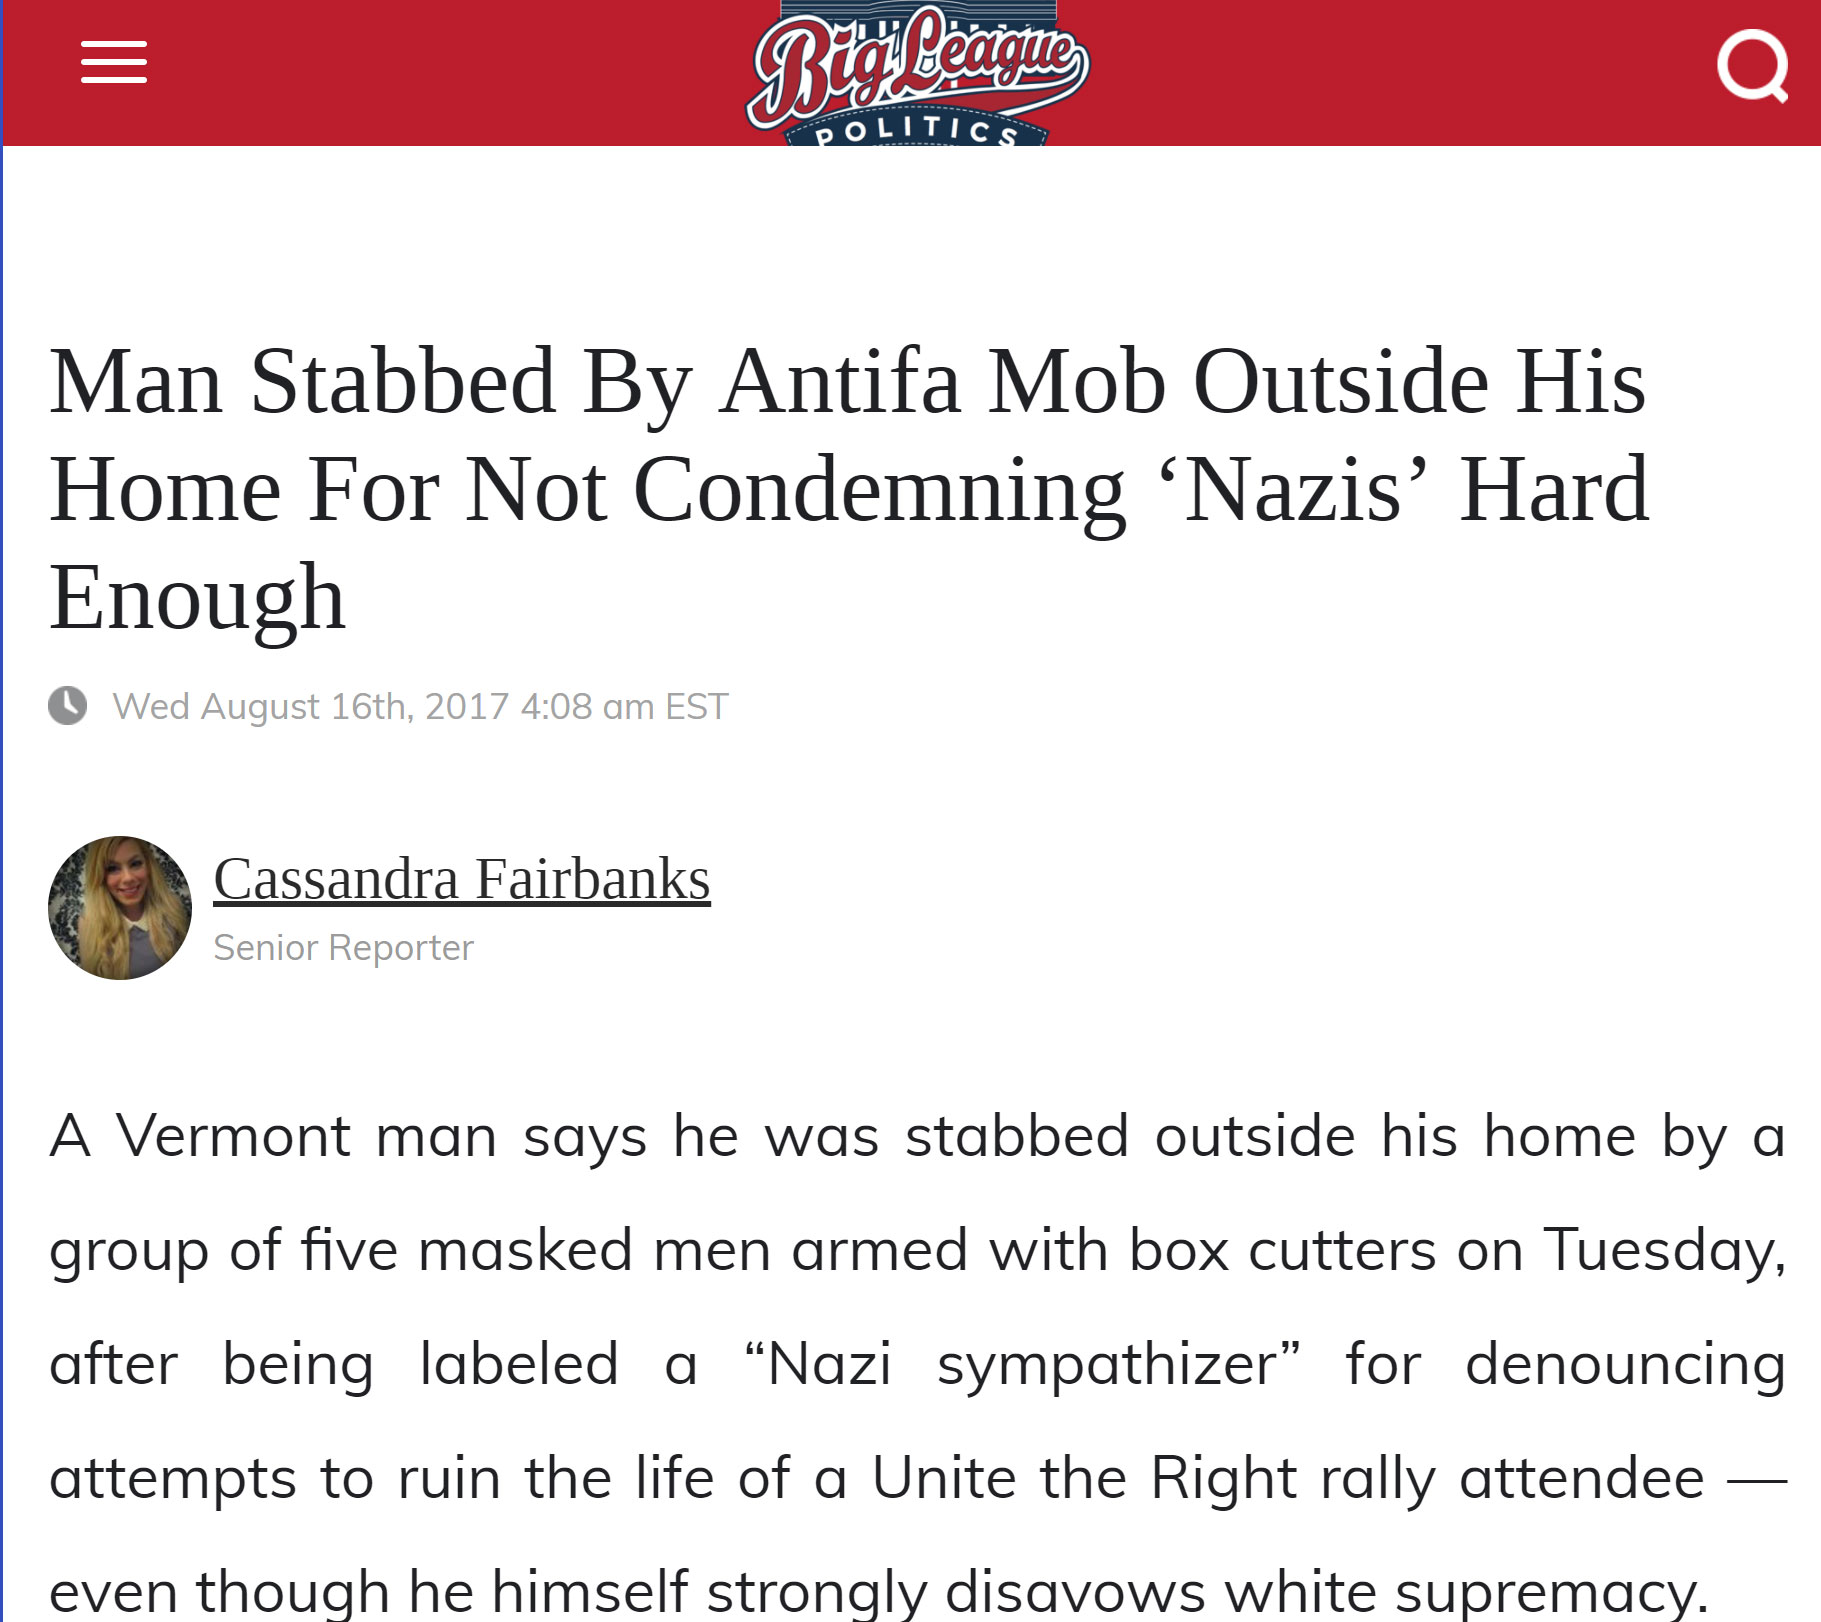 6-Man-Stabbed-By-Antifa-Mob-Outside-His-Home-For-Not-Condemning-'Nazis'-Hard-Enough.jpg